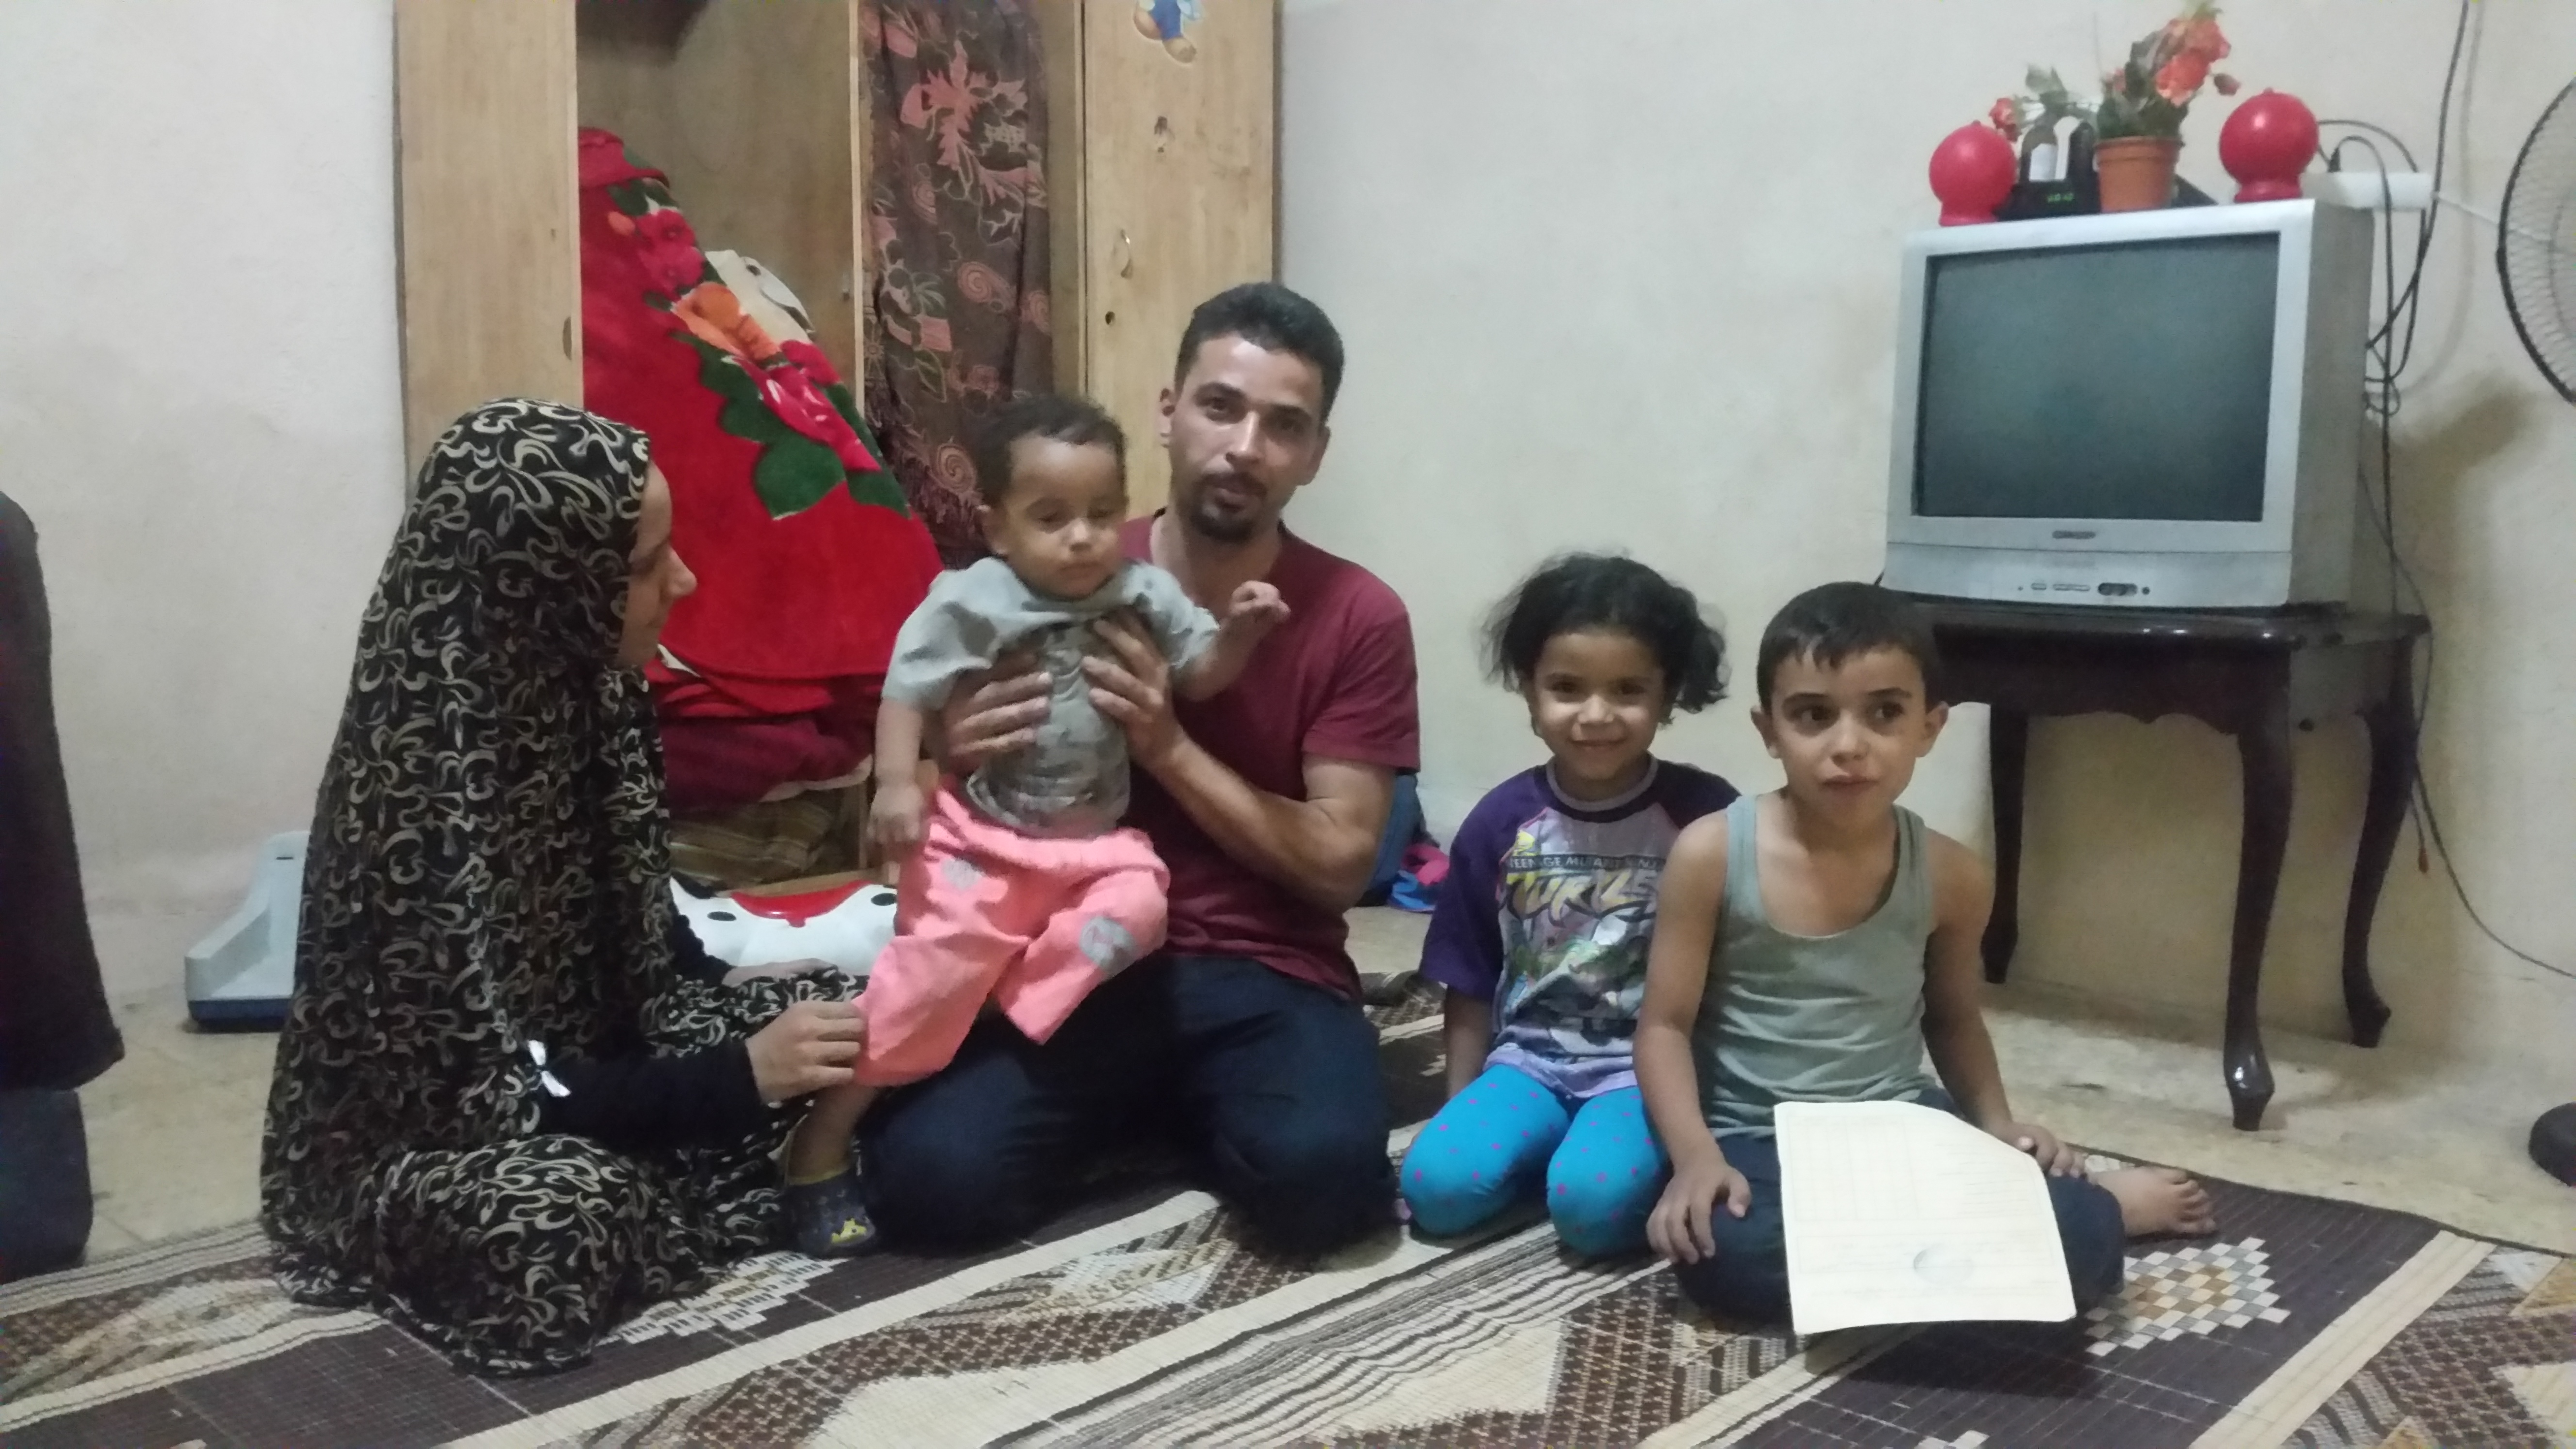 A Syrian Family Far from Home